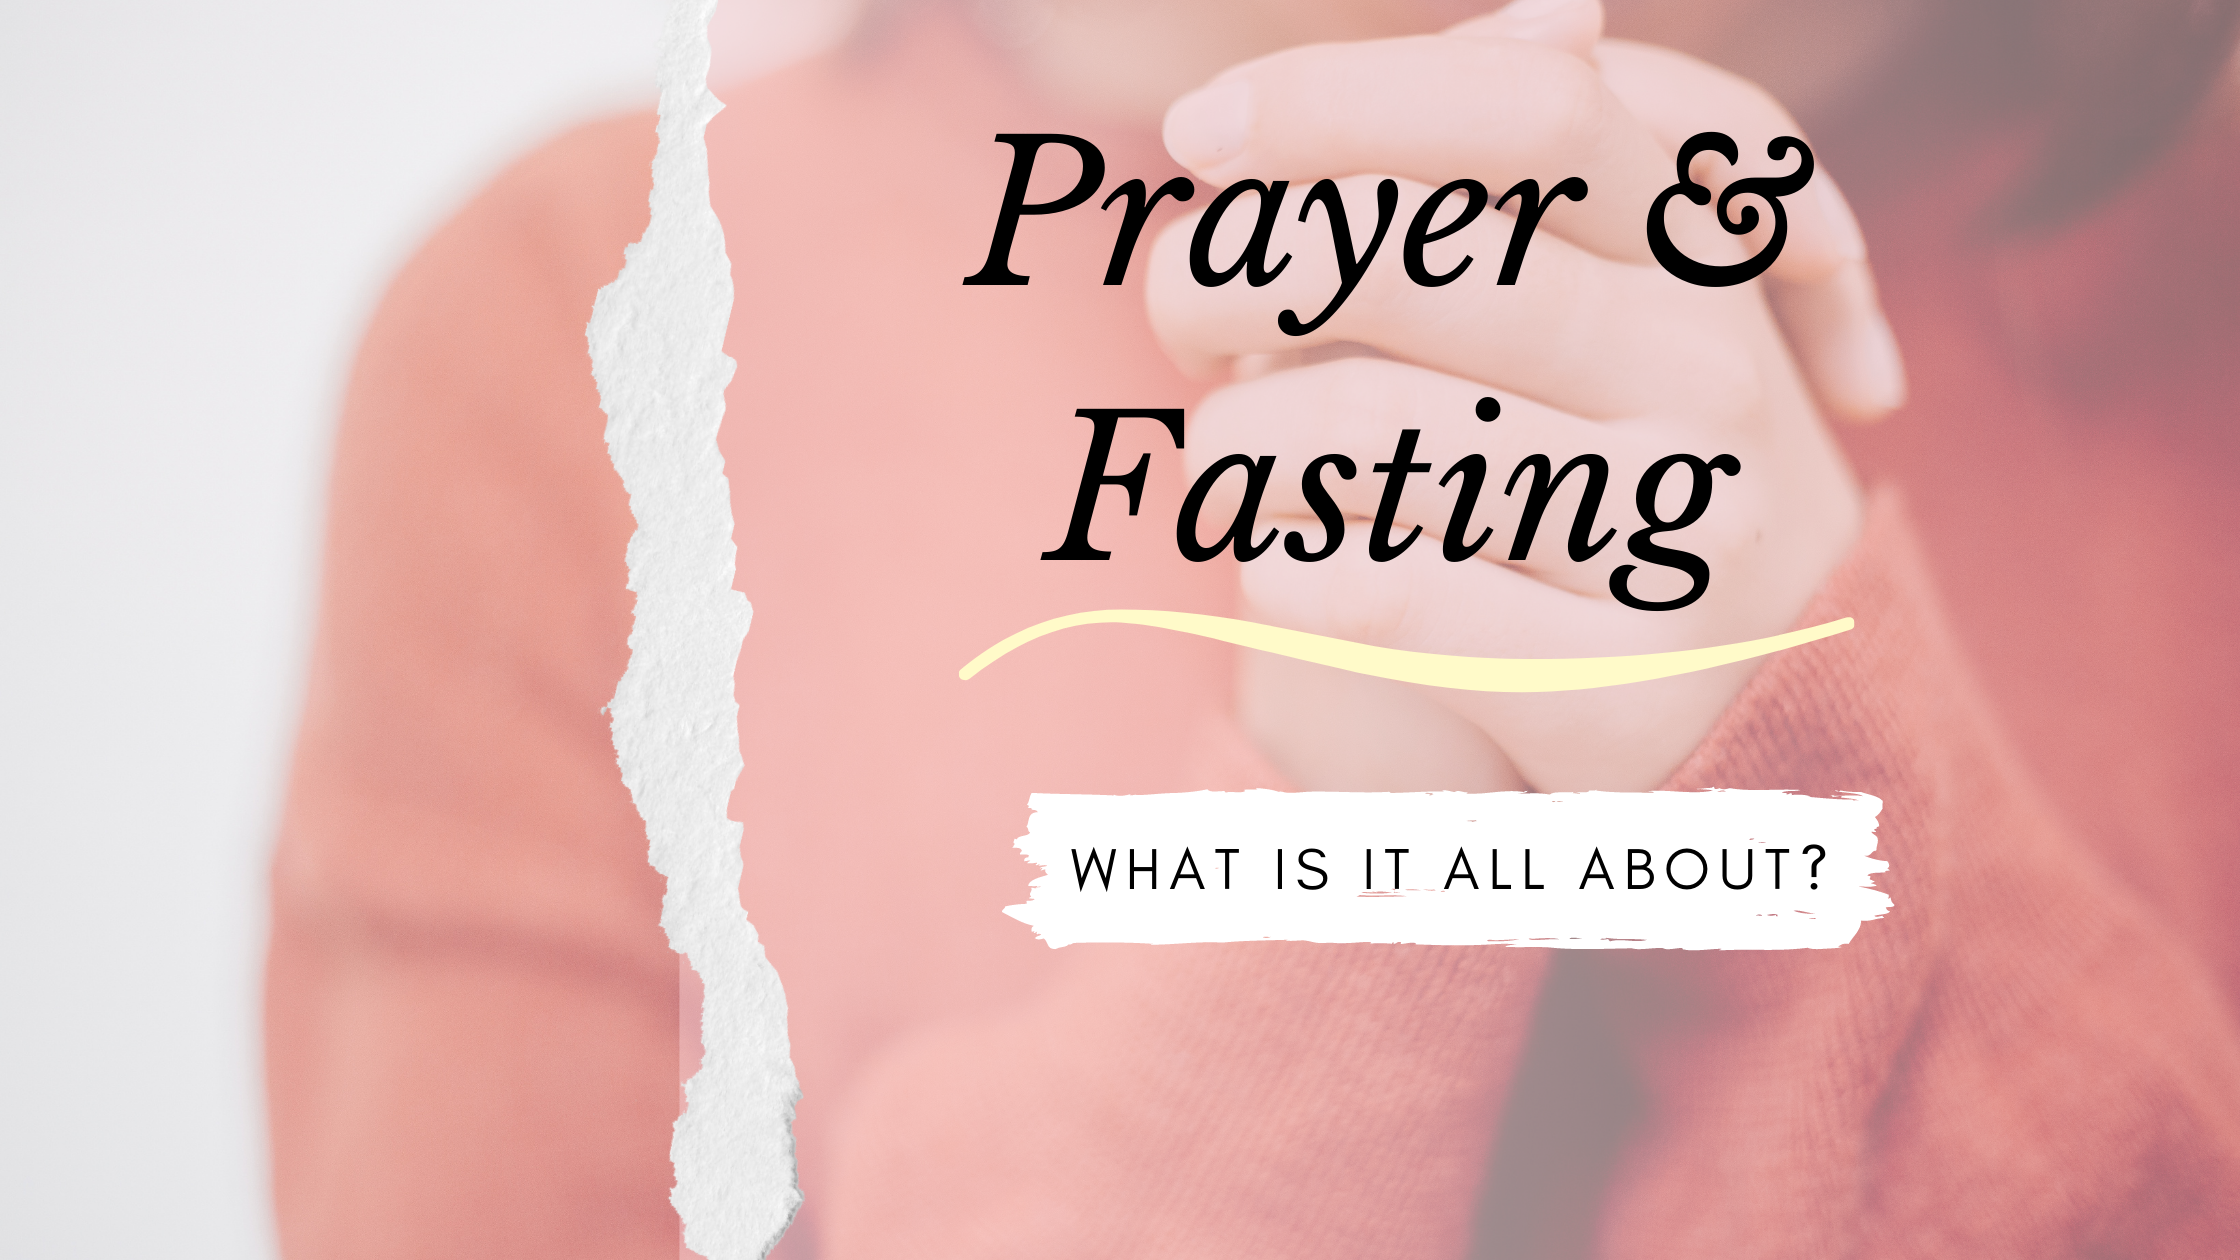 prayer and fasting what is it all about?